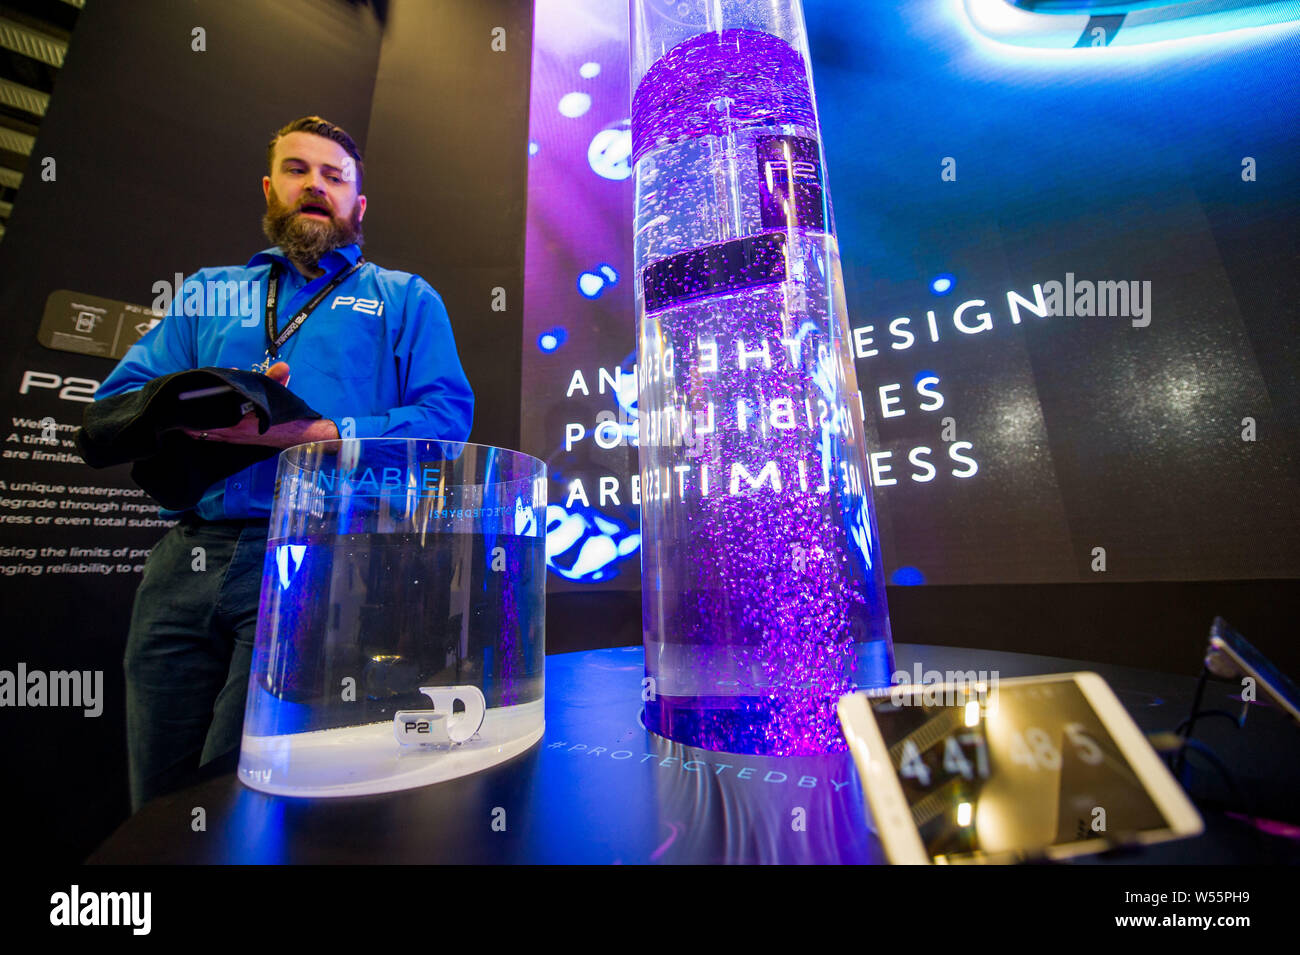 An employee of P2i introduces the company's water resistance technologies during the Mobile World Congress 2019 (MWC19) in Barcelona, Spain, 25 Februa Stock Photo